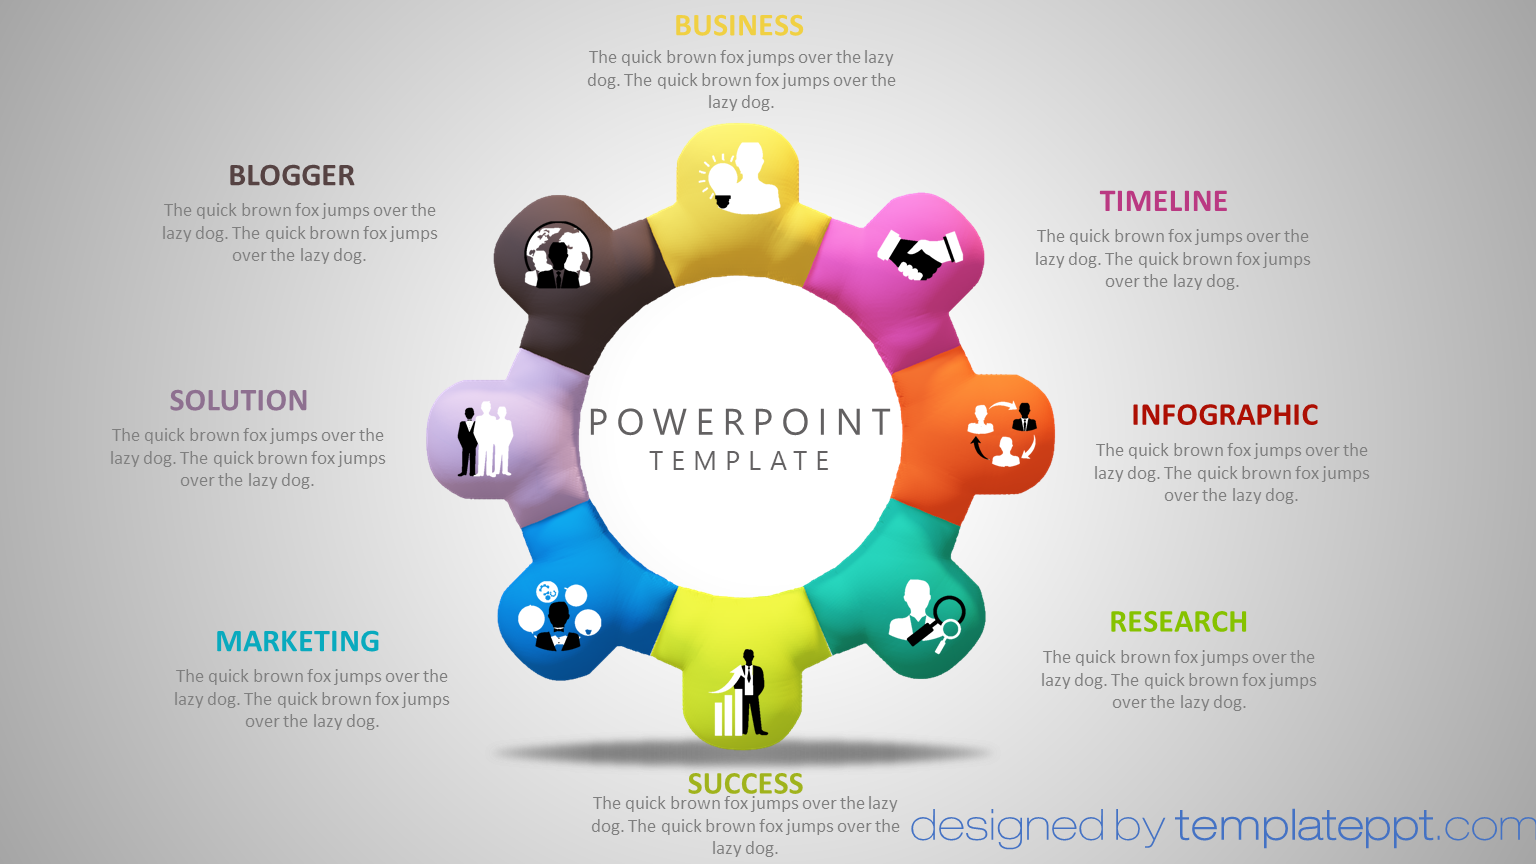 Powerpoint templates free.